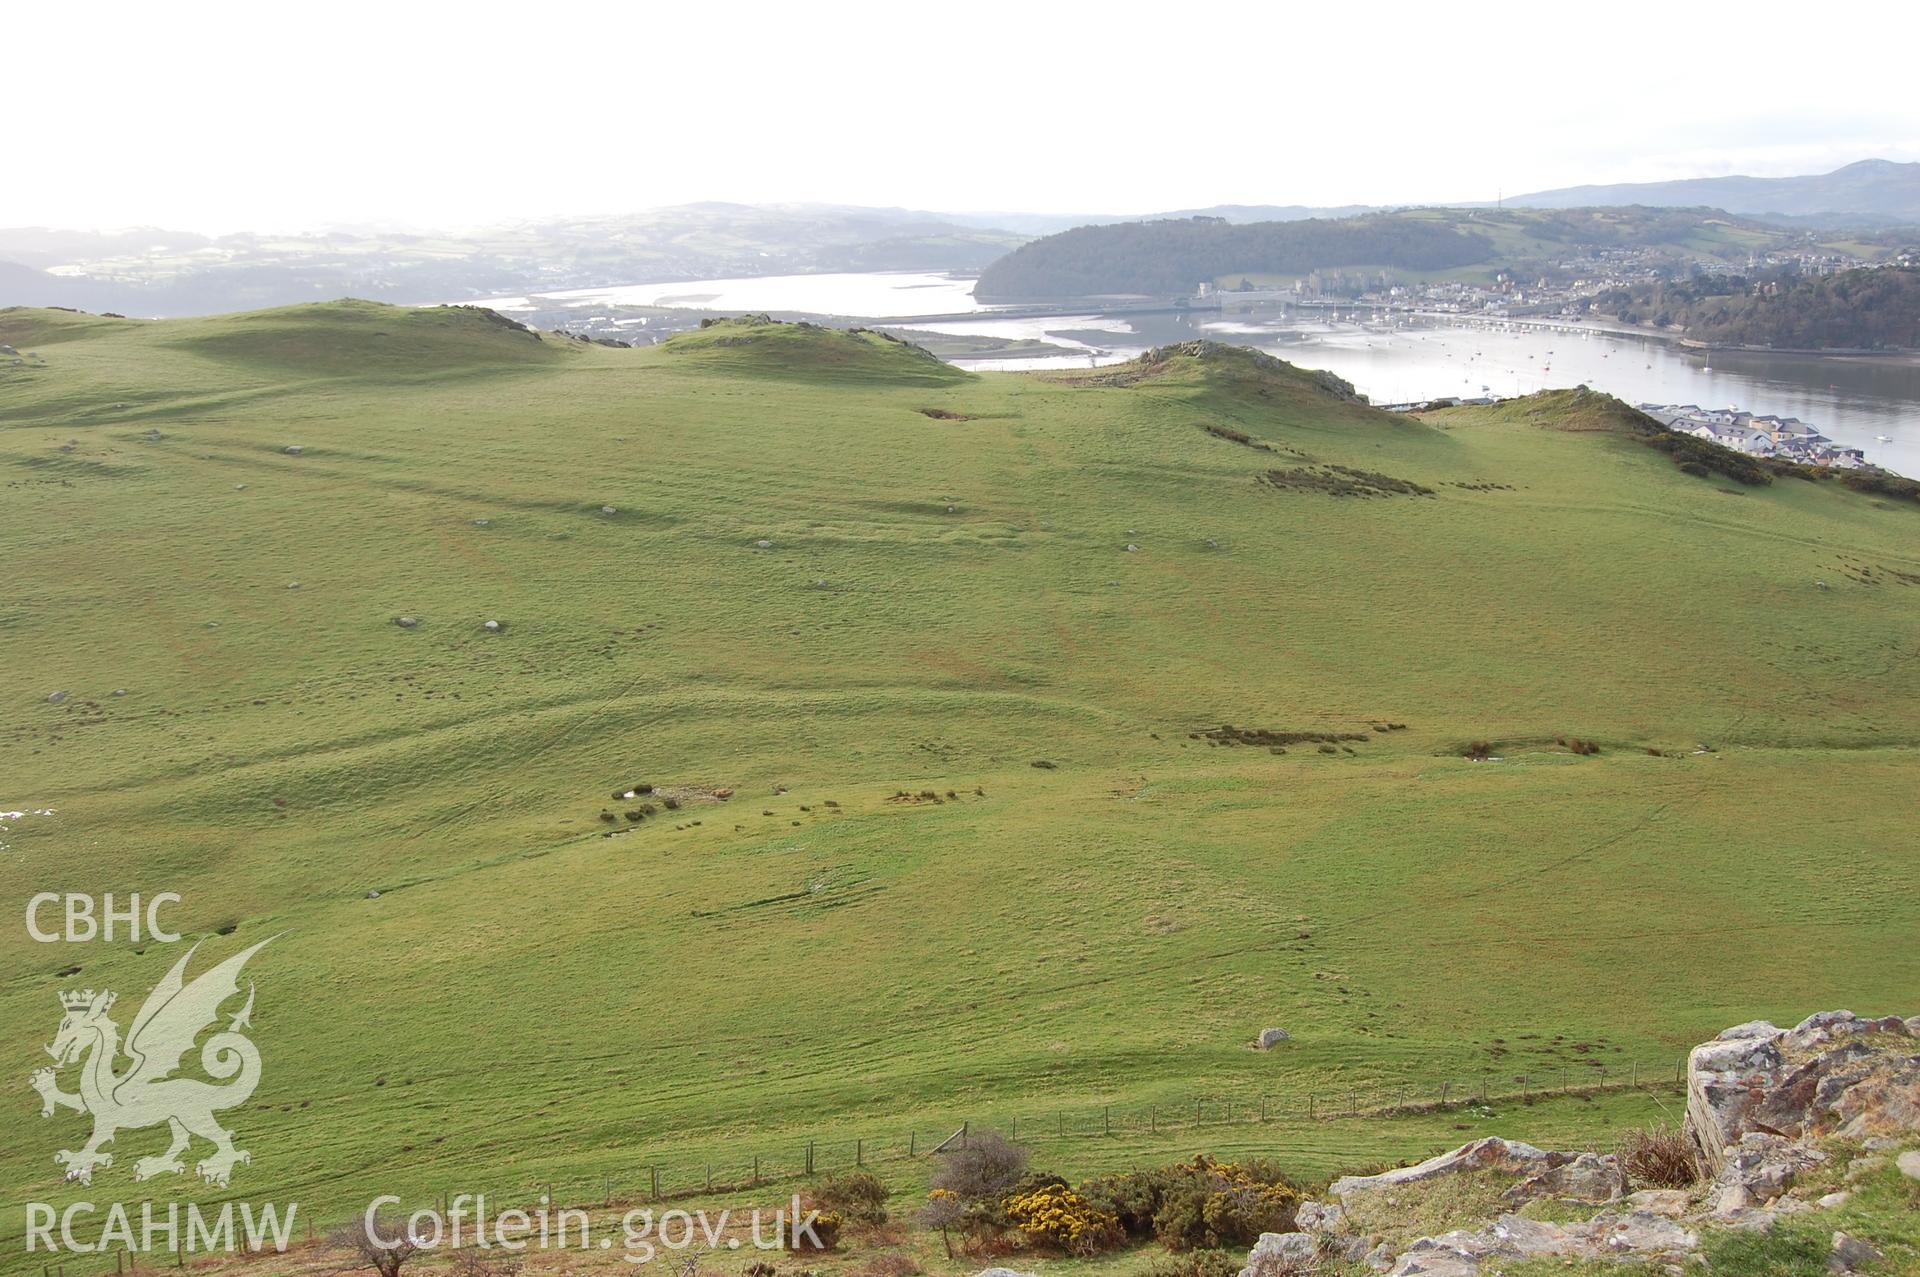 Digital photograph from an archaeological assessment of Deganwy Castle, carried out by Gwynedd Archaeological Trust, 2009. Field system south of the castle.